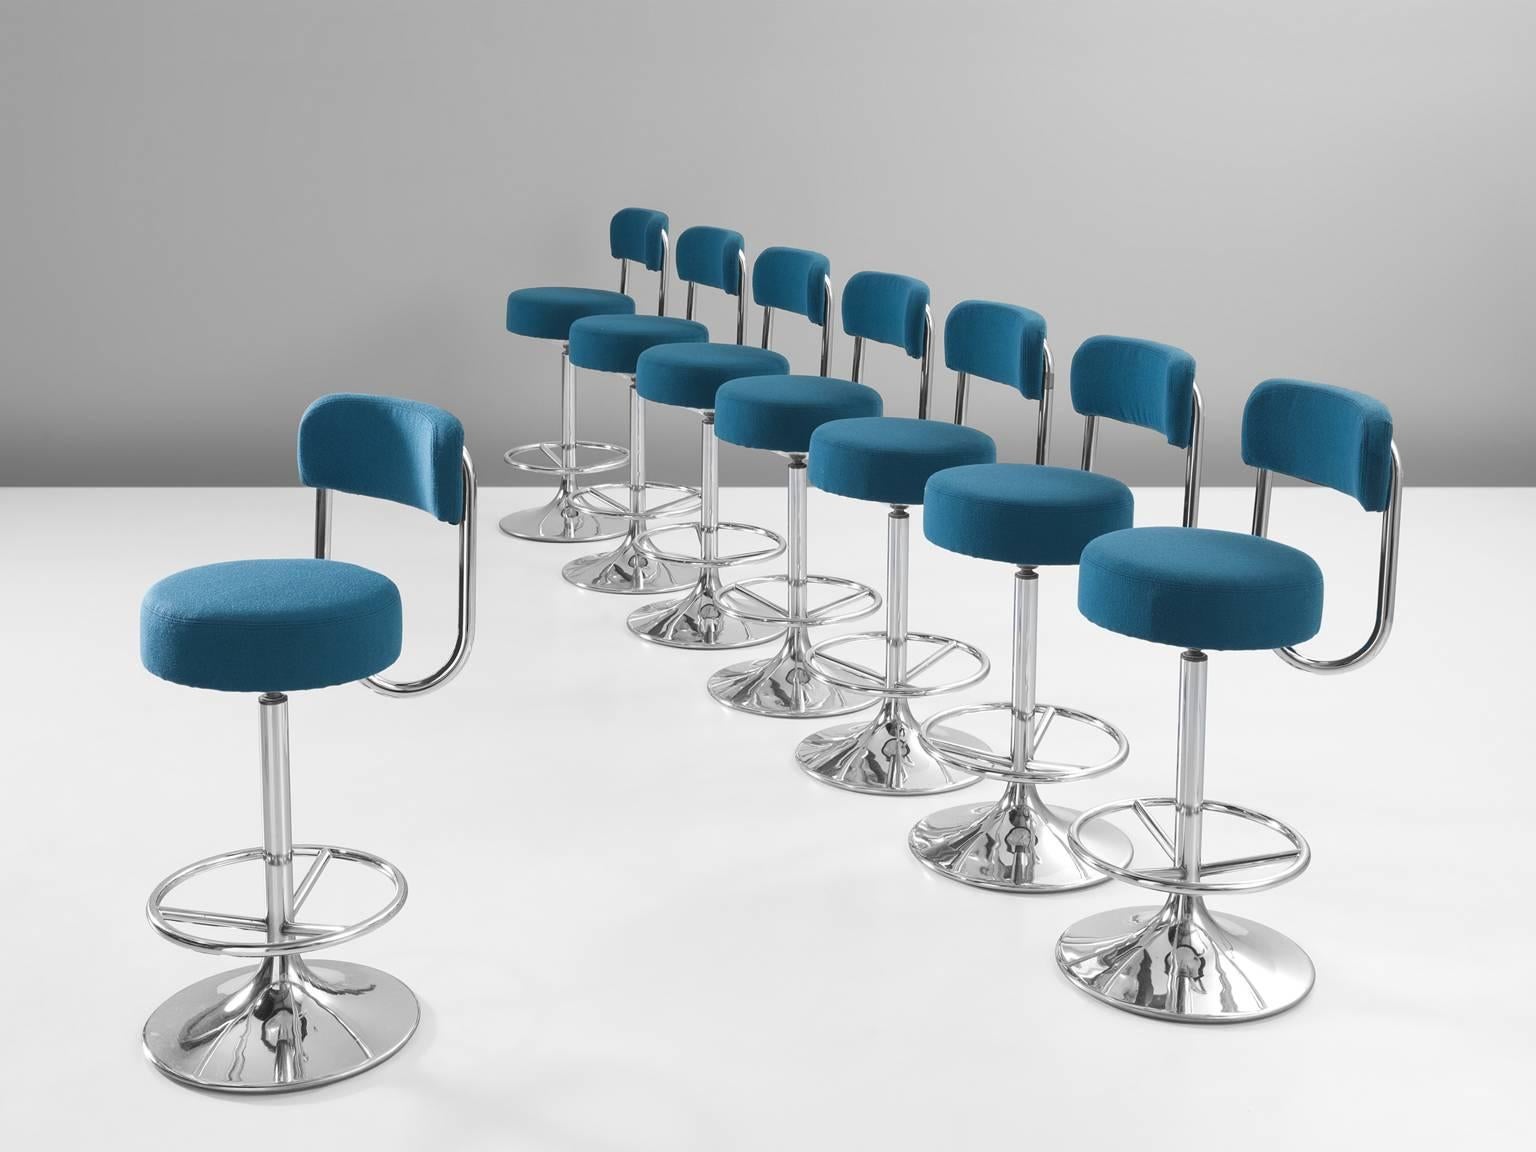 Bar stools, different types upholstery and metal, 1970s.

This set of ten bar stools by Johanson Design is both comfortable and functional at the same time. The chairs are small in width yet still support the back. The main feature of this design is